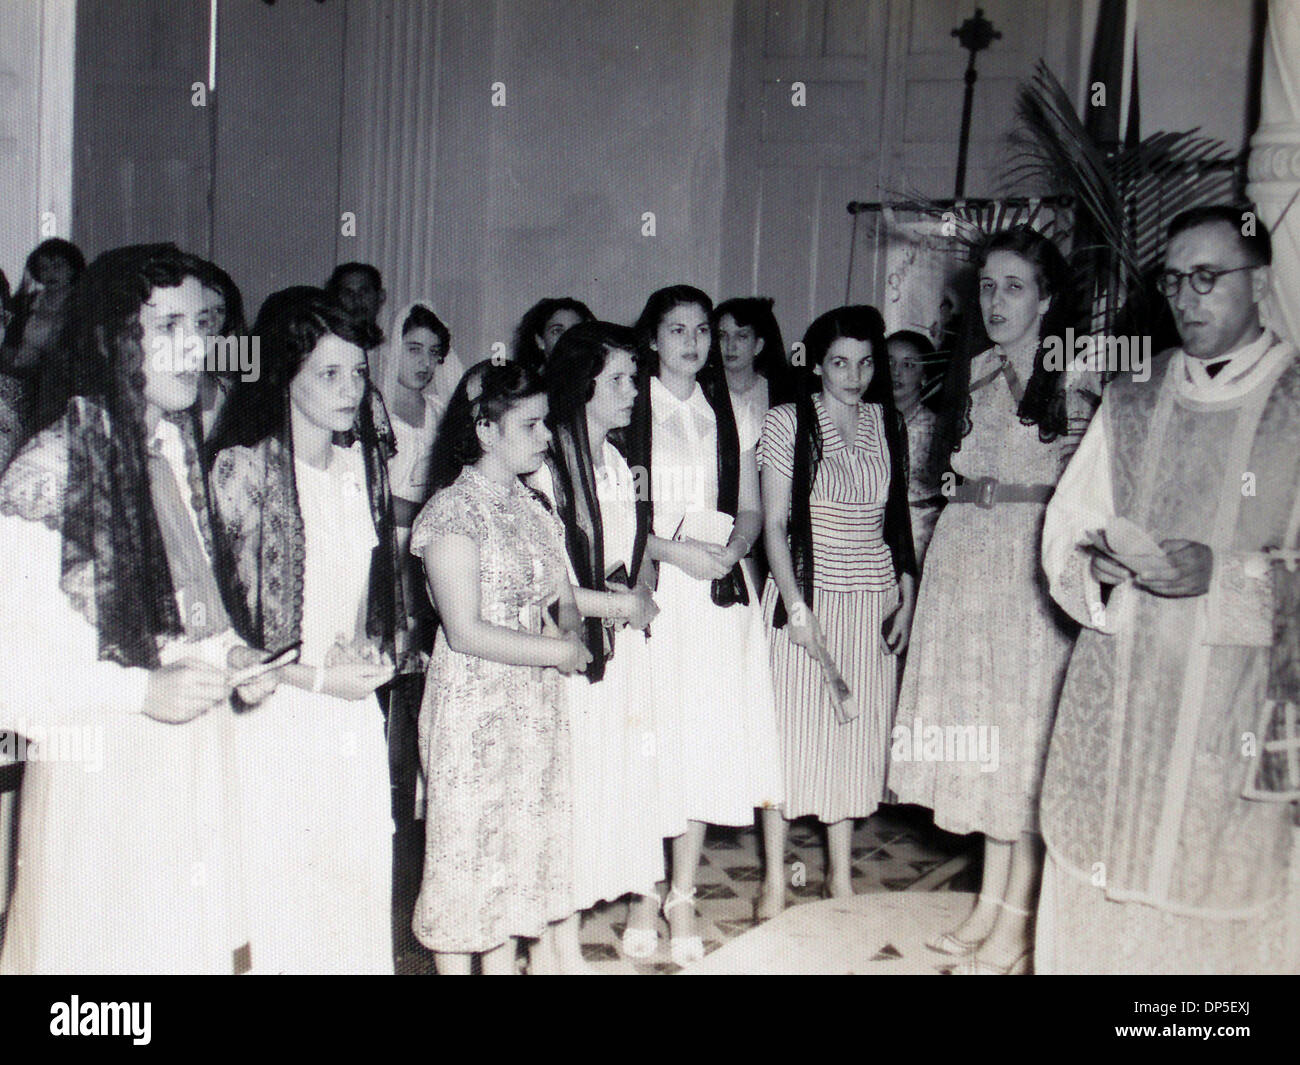 Sep 13, 2006; Havana, CUBA; My mother, Iraida, second from the left, at a church function. This was a weekly social activity for the girls from the neighborhood. Also pictured, third from the right, is my mother's late sister, Hortencia. Mandatory Credit: Photo by Palm Beach Post/ZUMA Press. (©) Copyright 2006 by Palm Beach Post Stock Photo